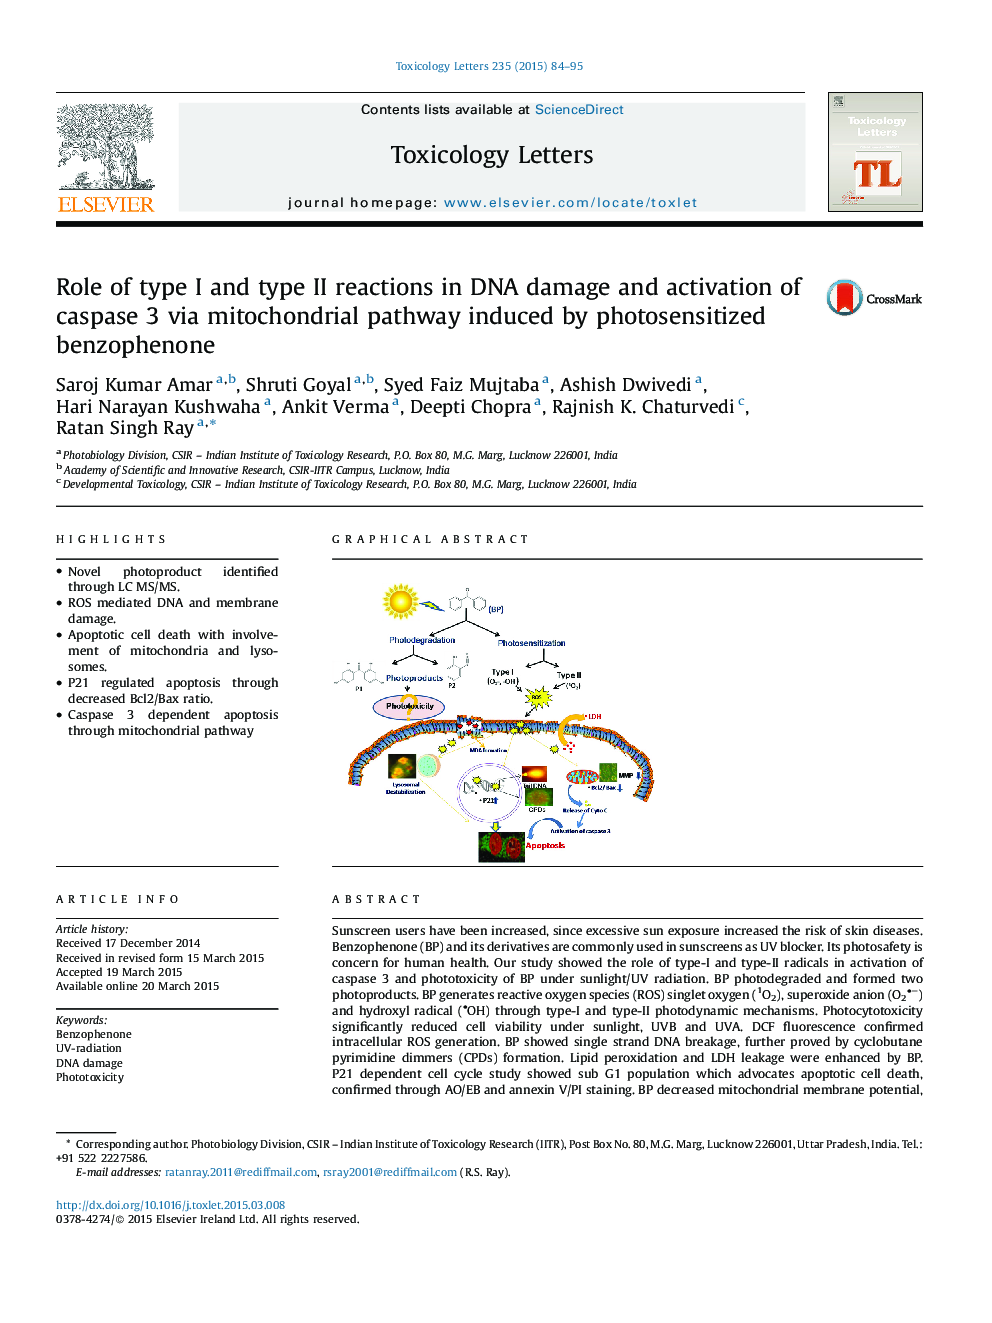 Role of type I & type II reactions in DNA damage and activation of Caspase 3 via mitochondrial pathway induced by photosensitized benzophenone